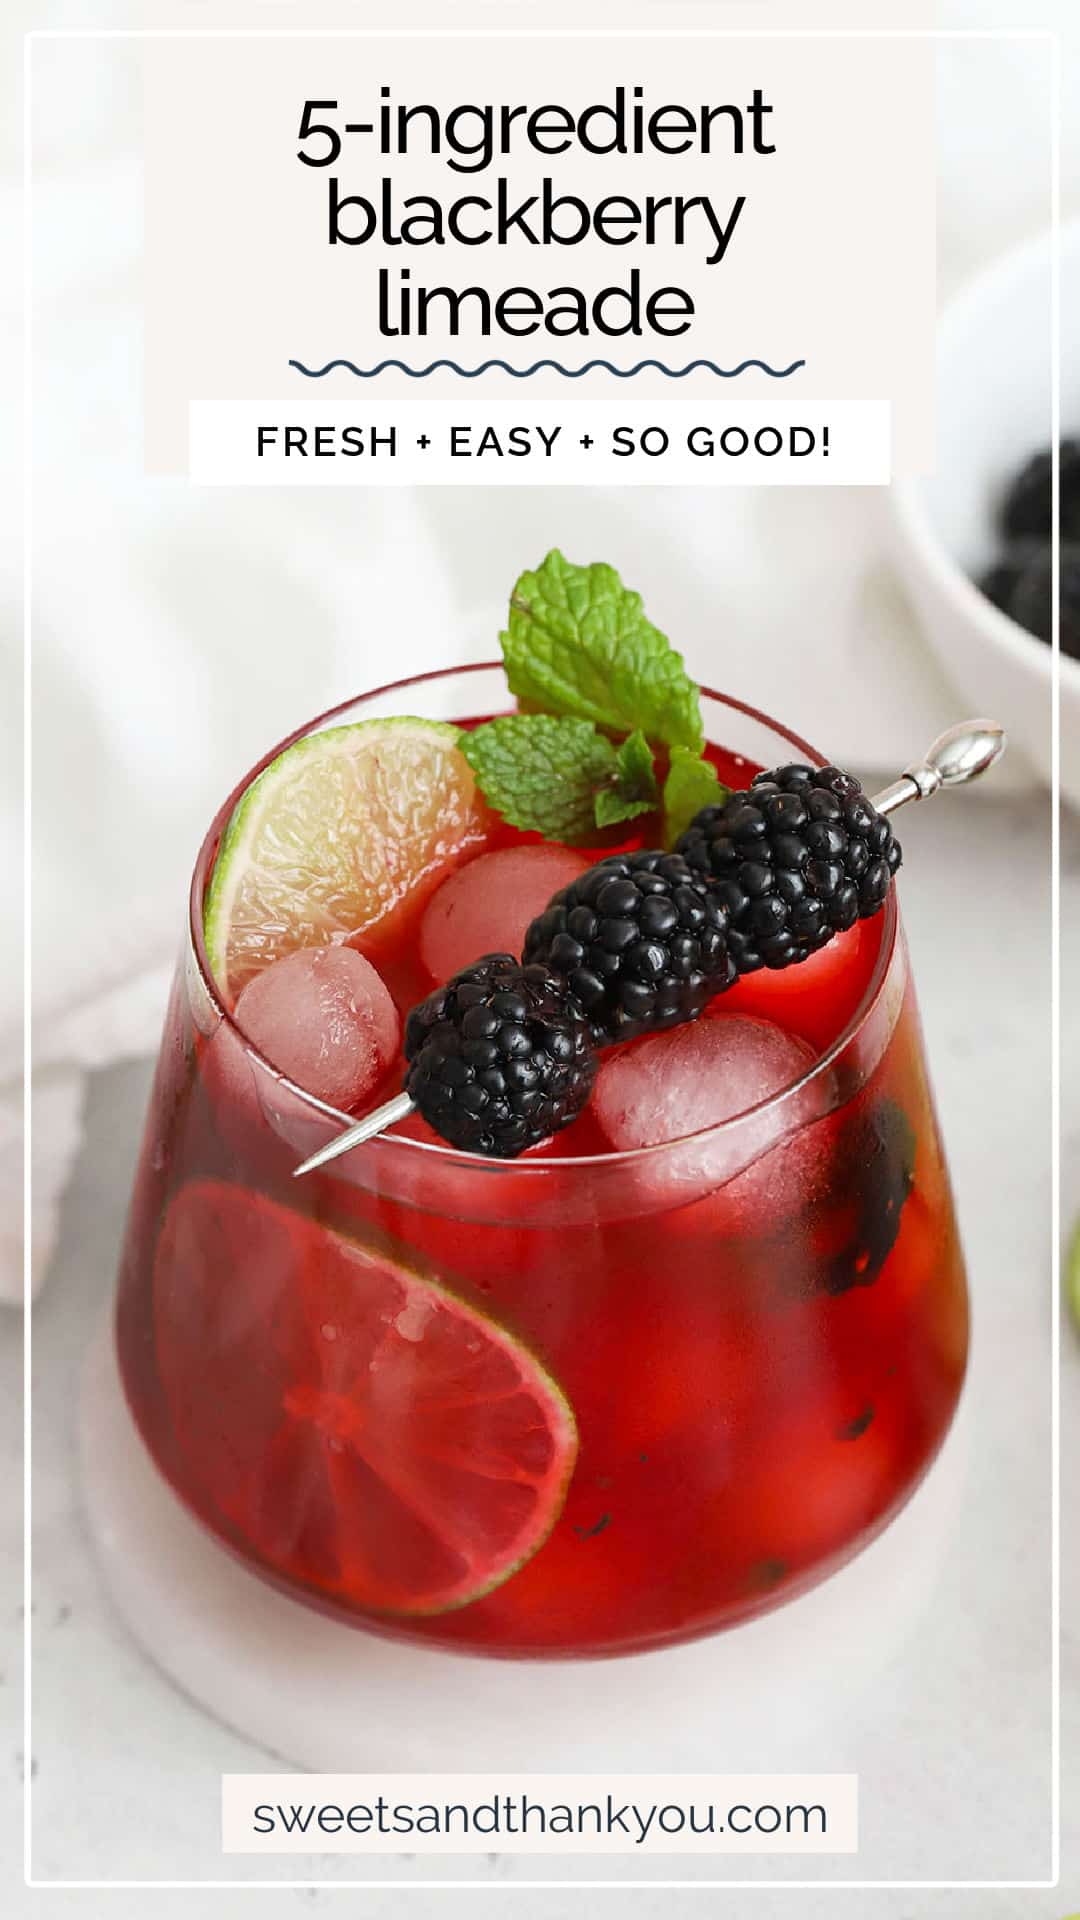 Our easy Blackberry Limeade recipe is the perfect drink to cool off with. You only need 5 ingredients to get started! / blackberry lemonade / homemade blackberry limeade / summer drink / blackberry mocktail / blackberry mojito mocktail / virgin blackberry mojito / 5 ingredient blackberry limeade / berry limeade / spring drink / summer mocktail recipe / blackberry drinks / blackberry recipe / blackberry mocktail recipe /